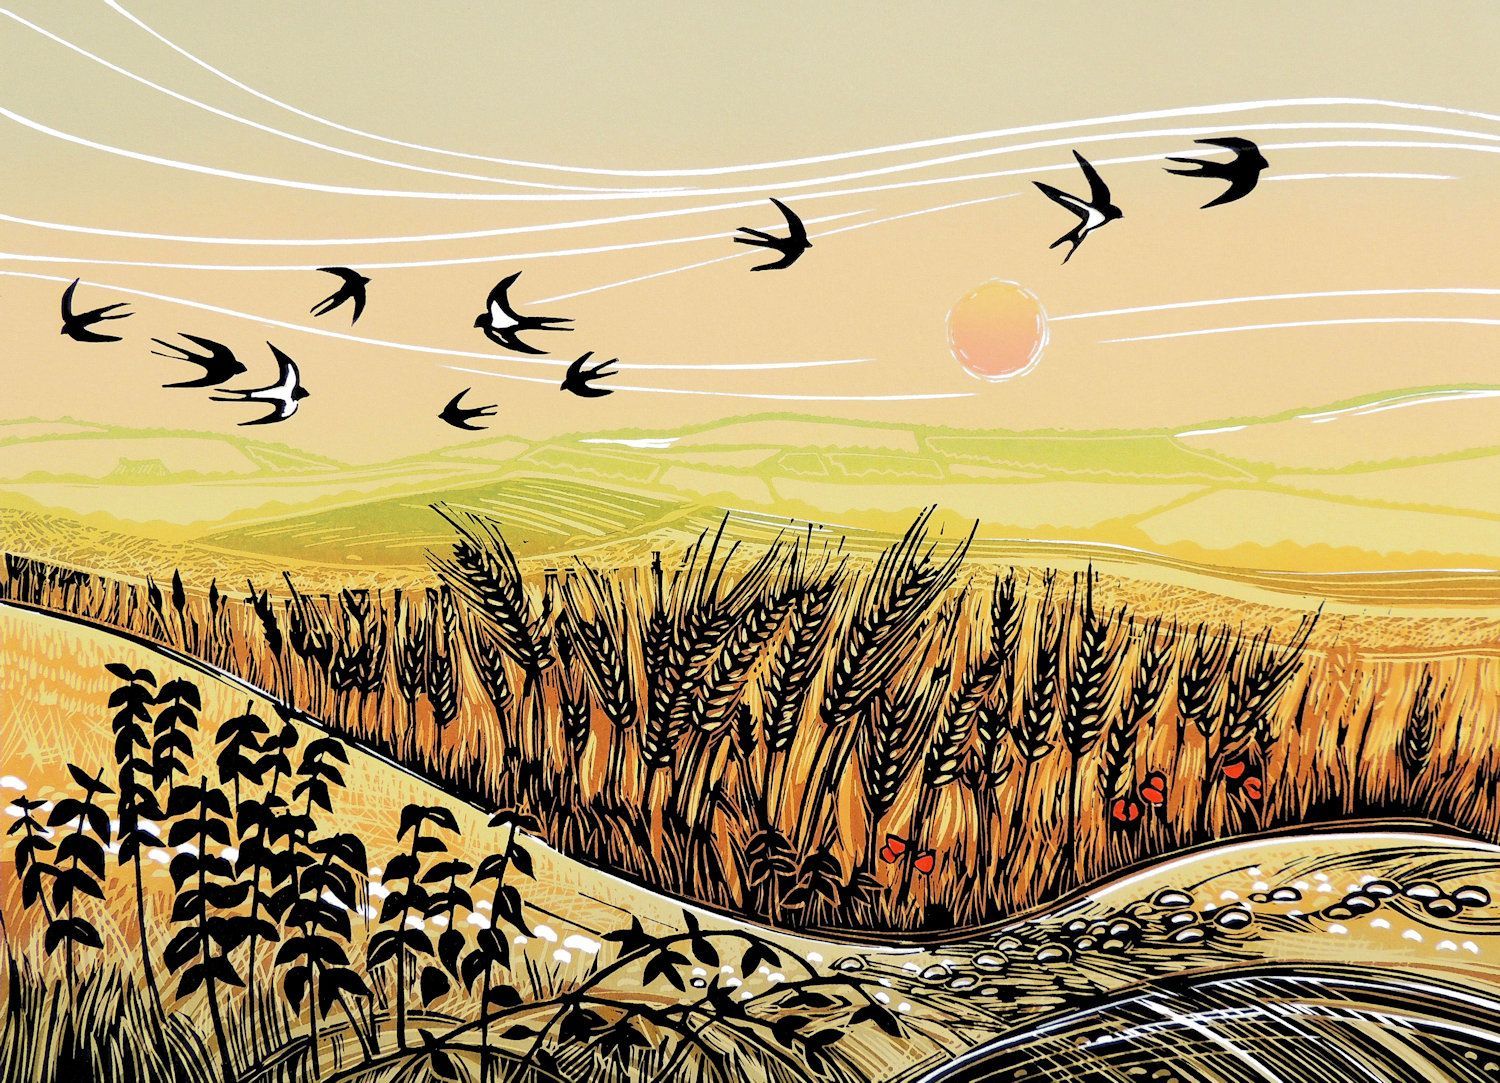 Flight Over The Barley by Rob Barnes